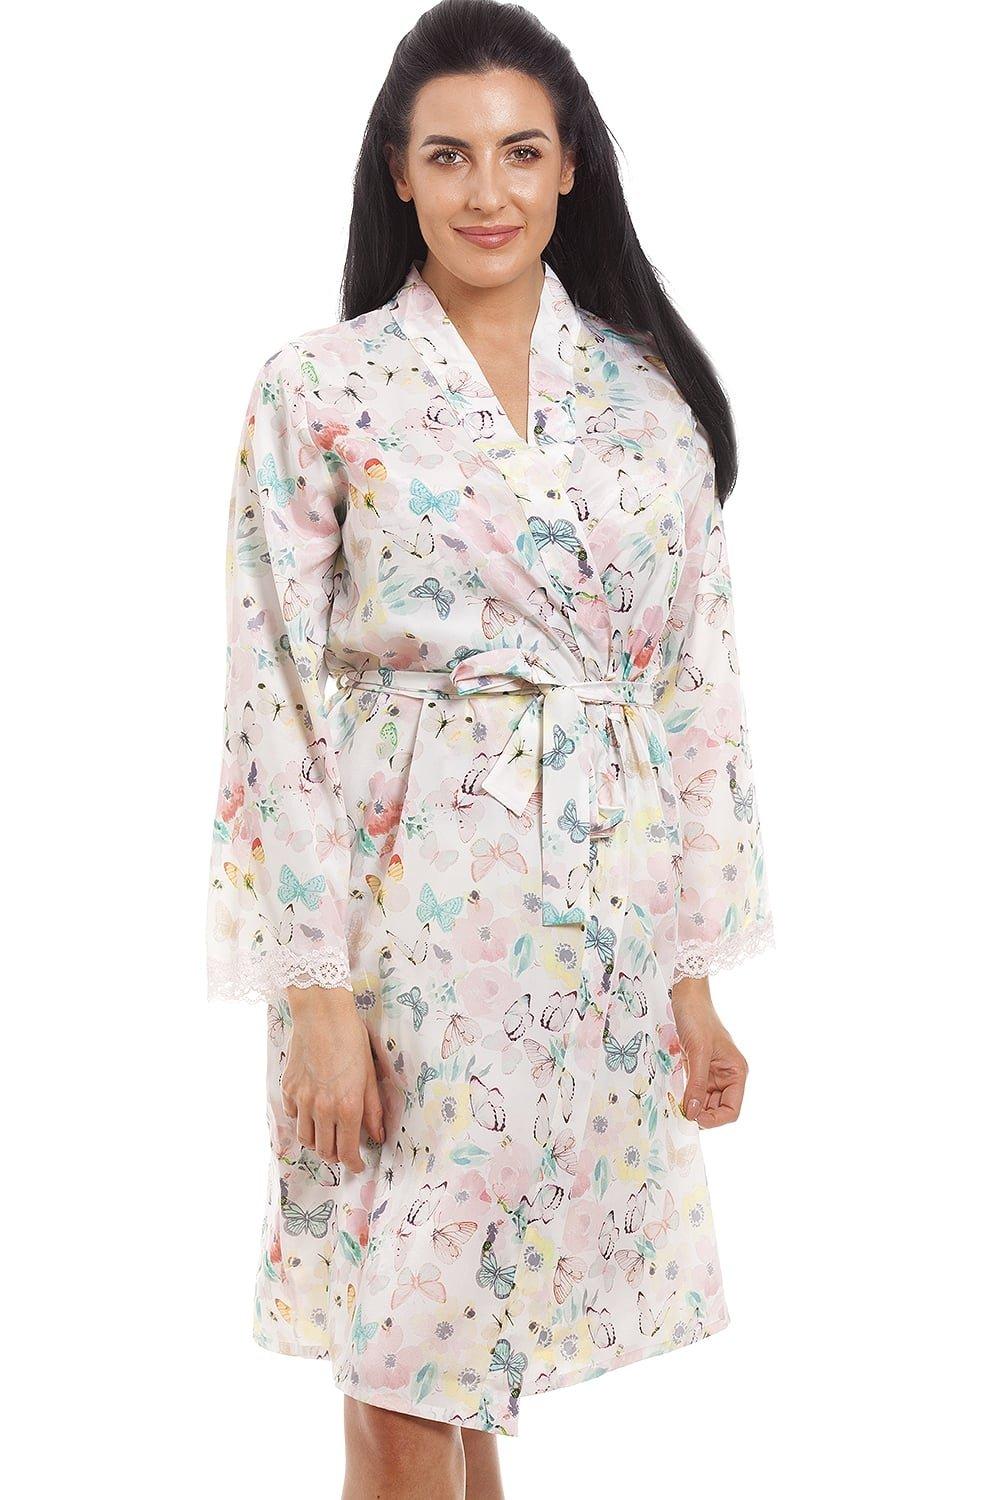 Butterfly And Bumble Bee Print Dressing Gown